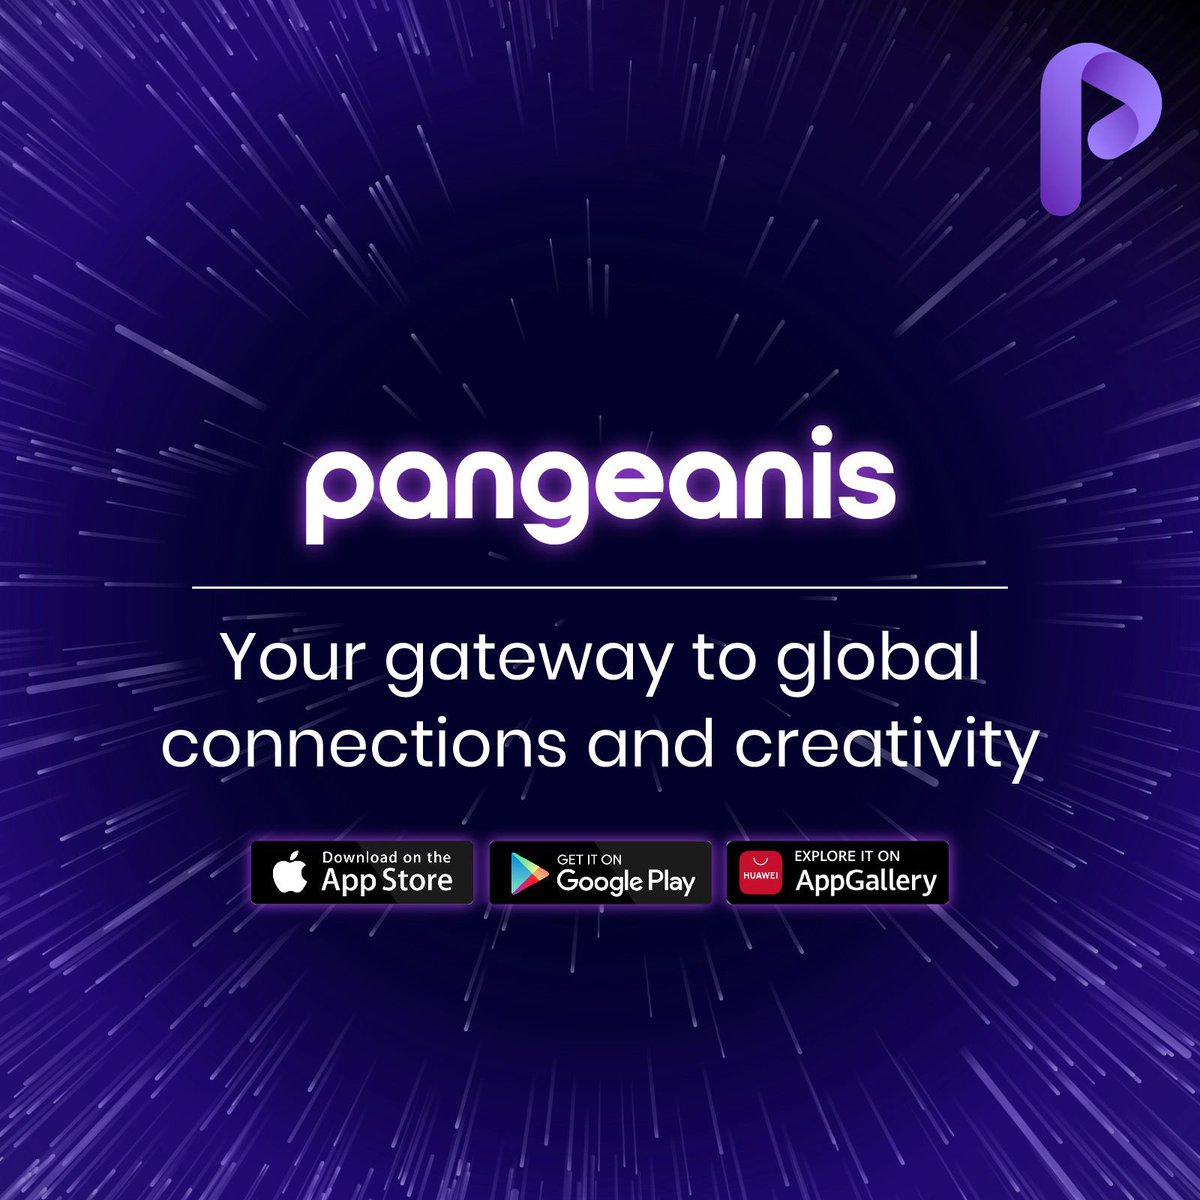 Your gateway to global connectivity and creativity!

Join our @Pangeanis community of creators, and innovators from every corner of the globe, and find endless opportunities!

iOS: apps.apple.com/us/app/pangean…

Android: play.google.com/store/apps/det…

#Pangeanis #App #iOS #Android